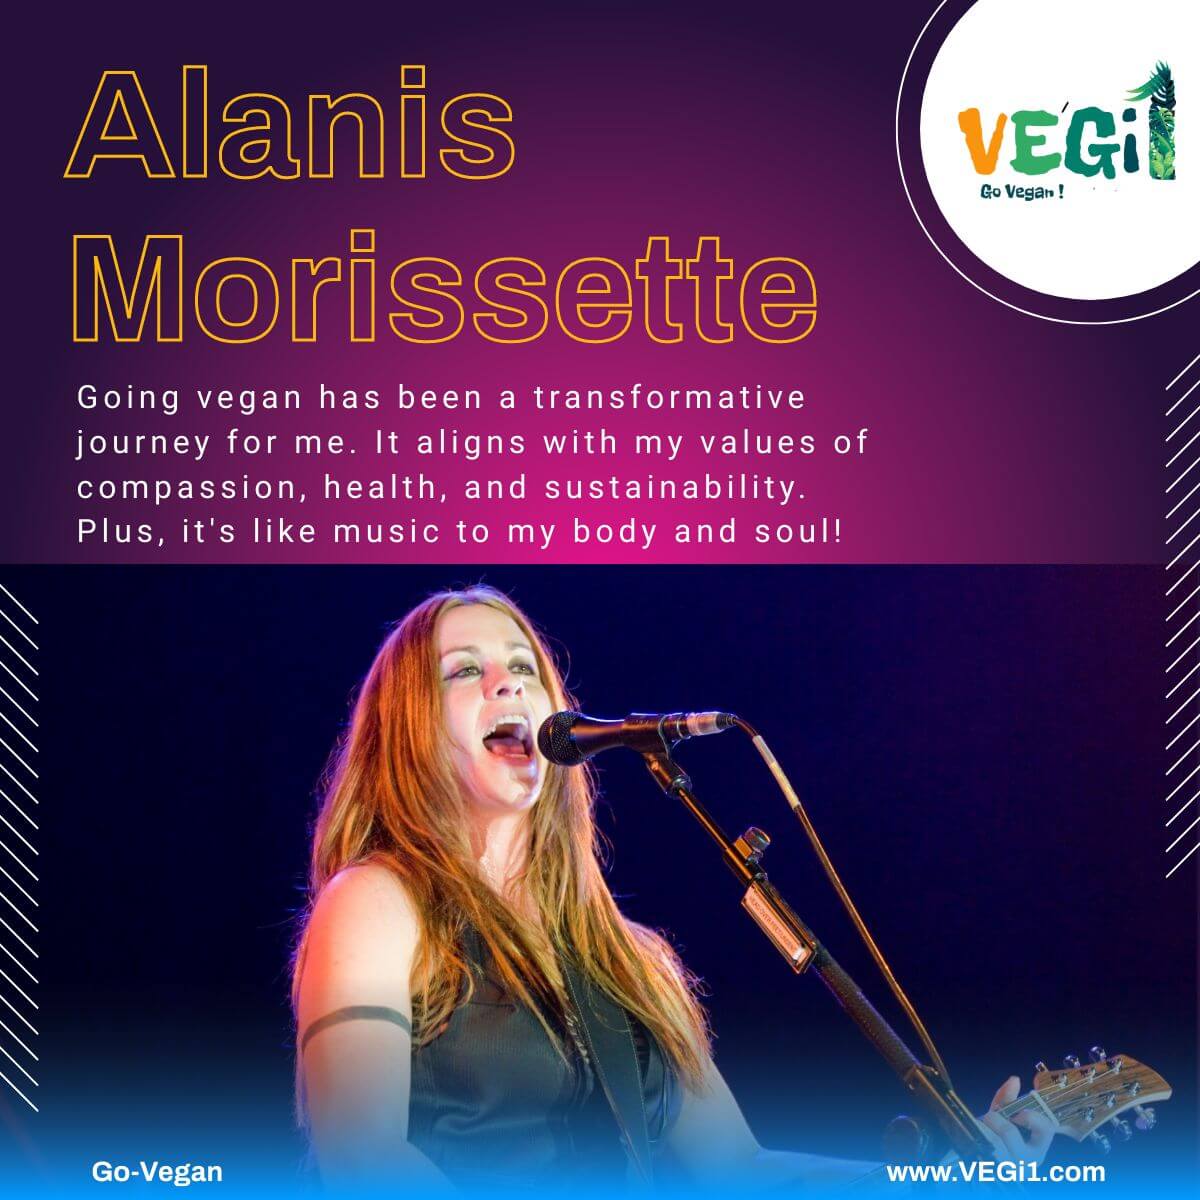 Going vegan has been a transformative journey for me. It aligns with my values of compassion, health, and sustainability. Plus, it's like music to my body and soul!